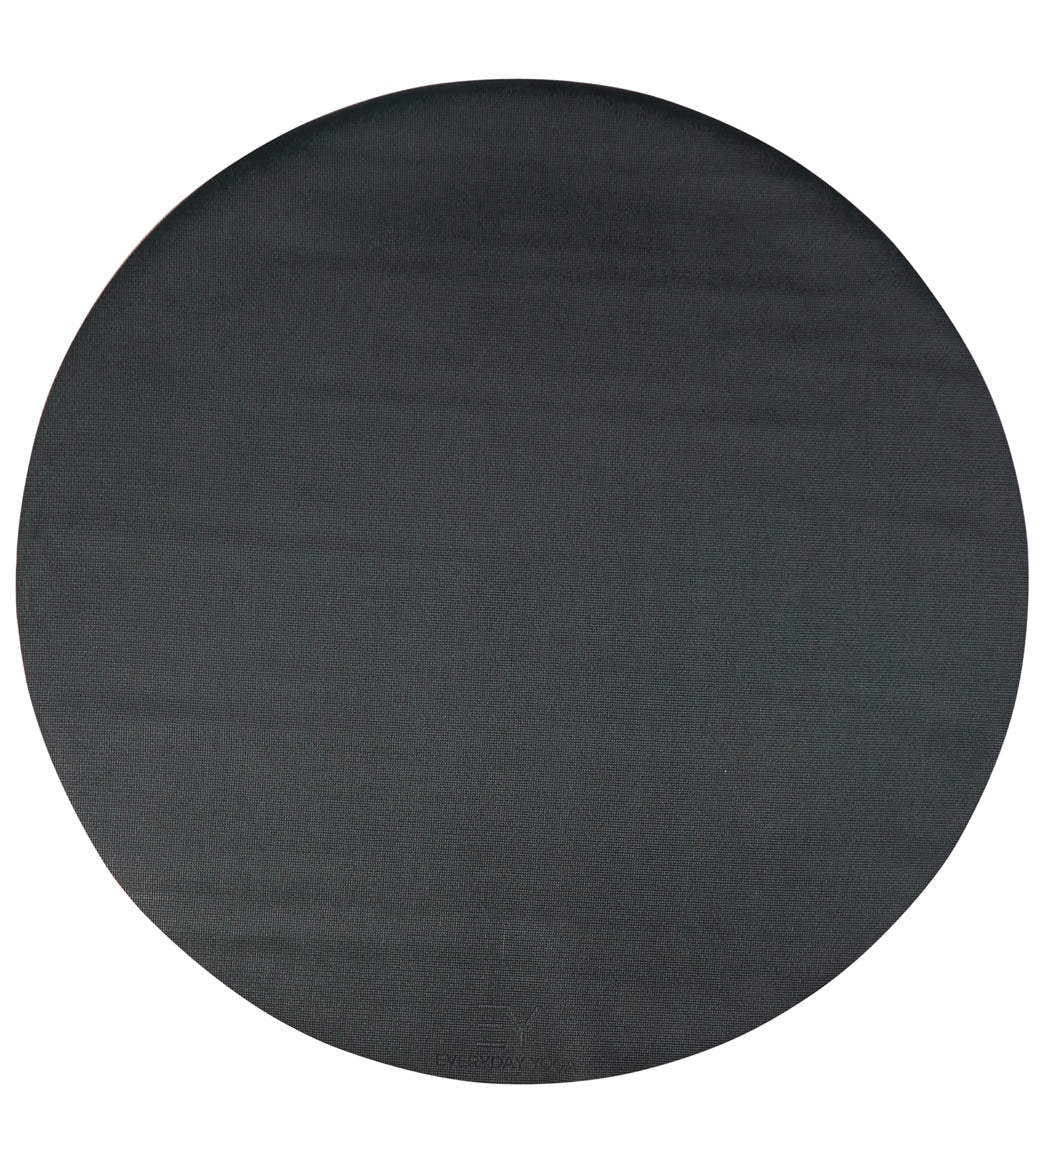 Everyday Yoga Round Yoga Mat 6' diameter 5mm at YogaOutlet.com - Free  Shipping –